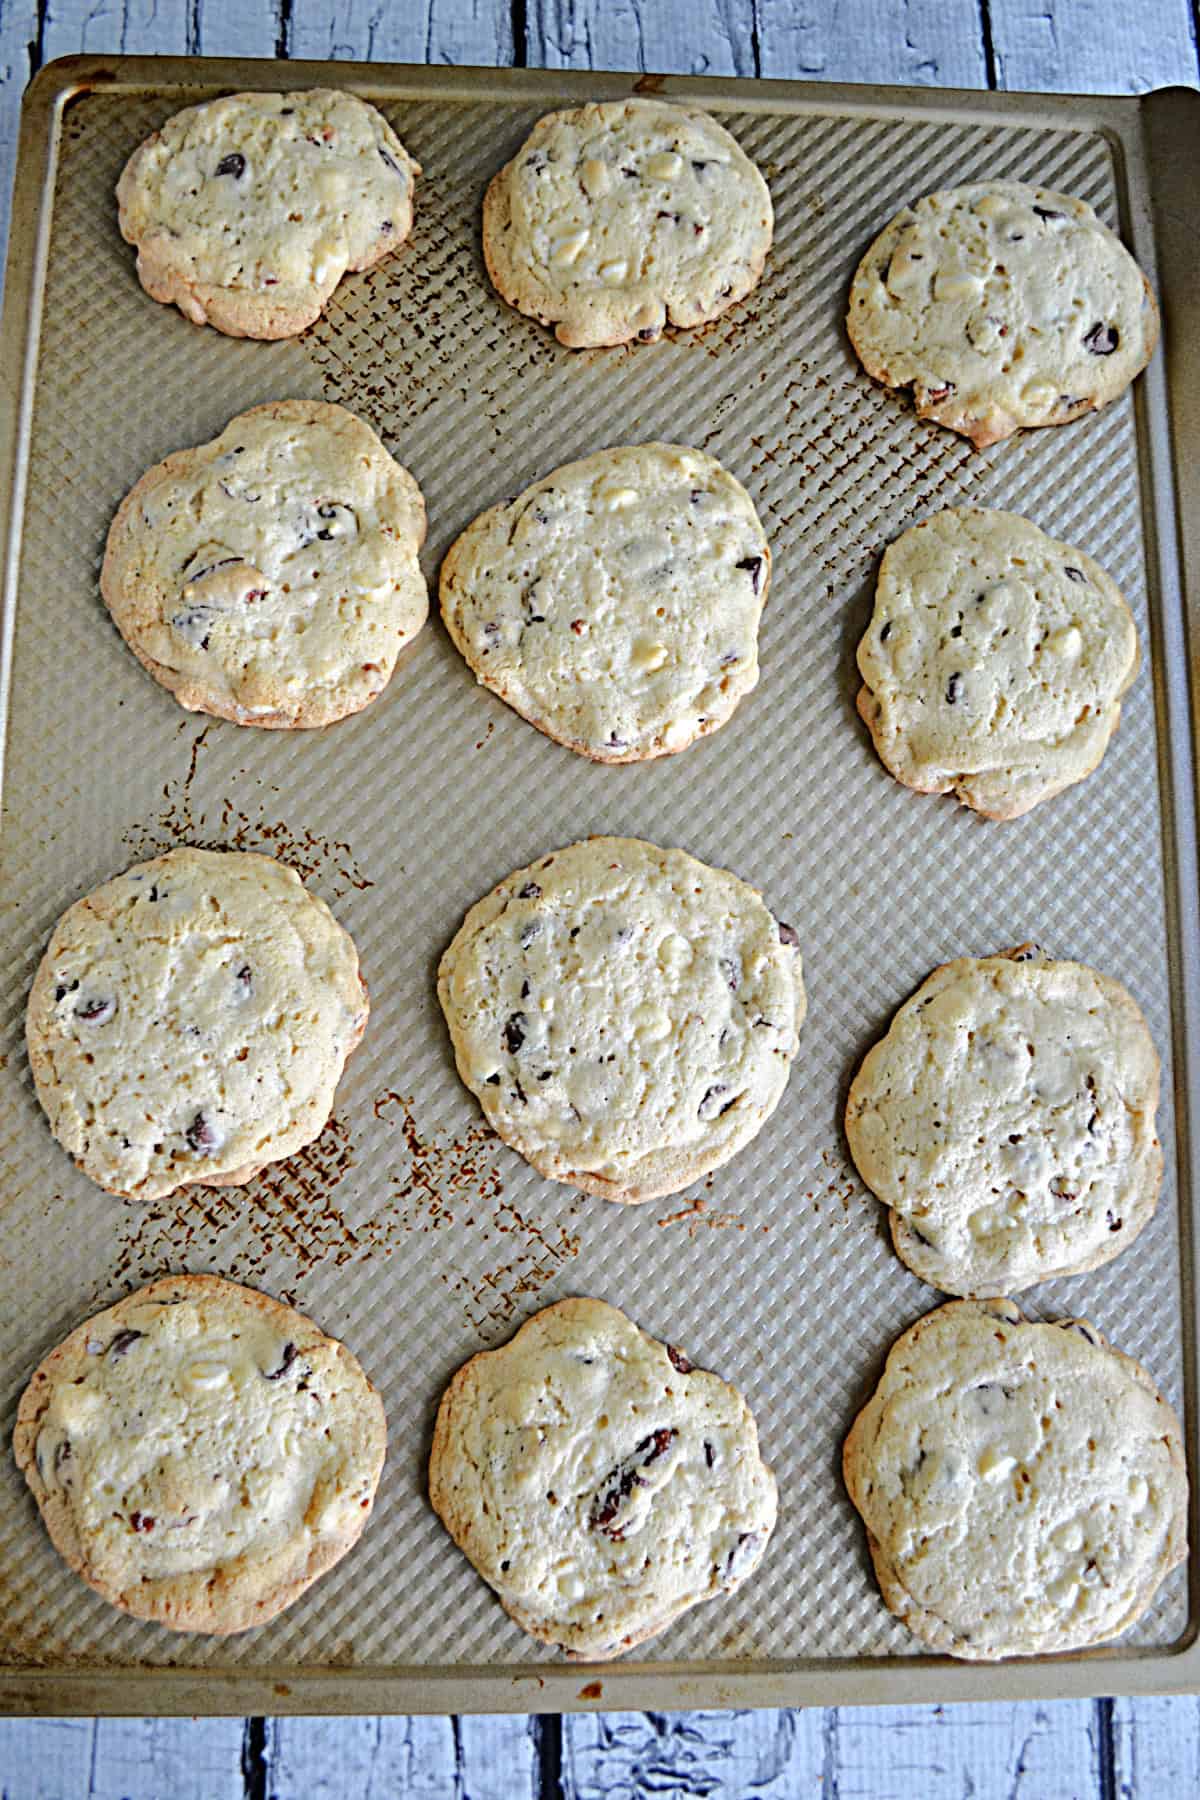 mama kelce cookies 1 - Hezzi-D's Books and Cooks